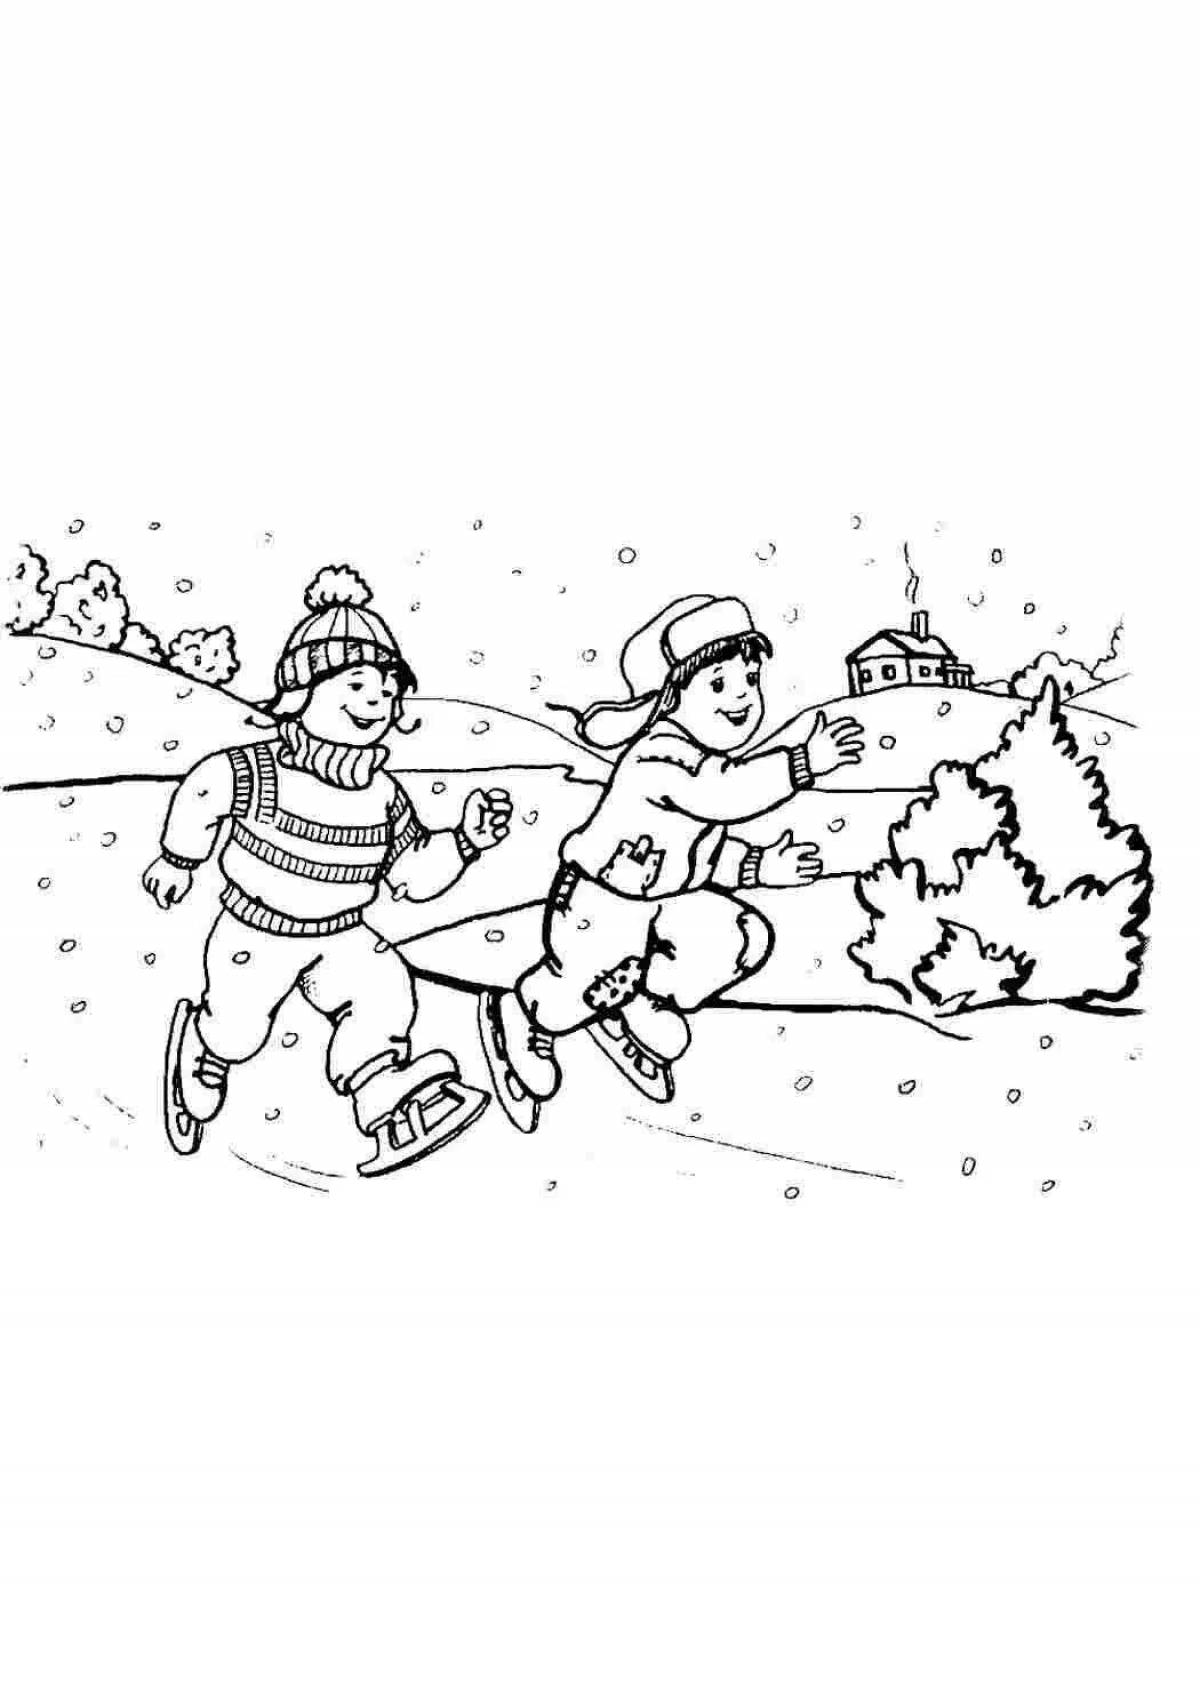 Winter Safety Playful Coloring Page for Preschoolers